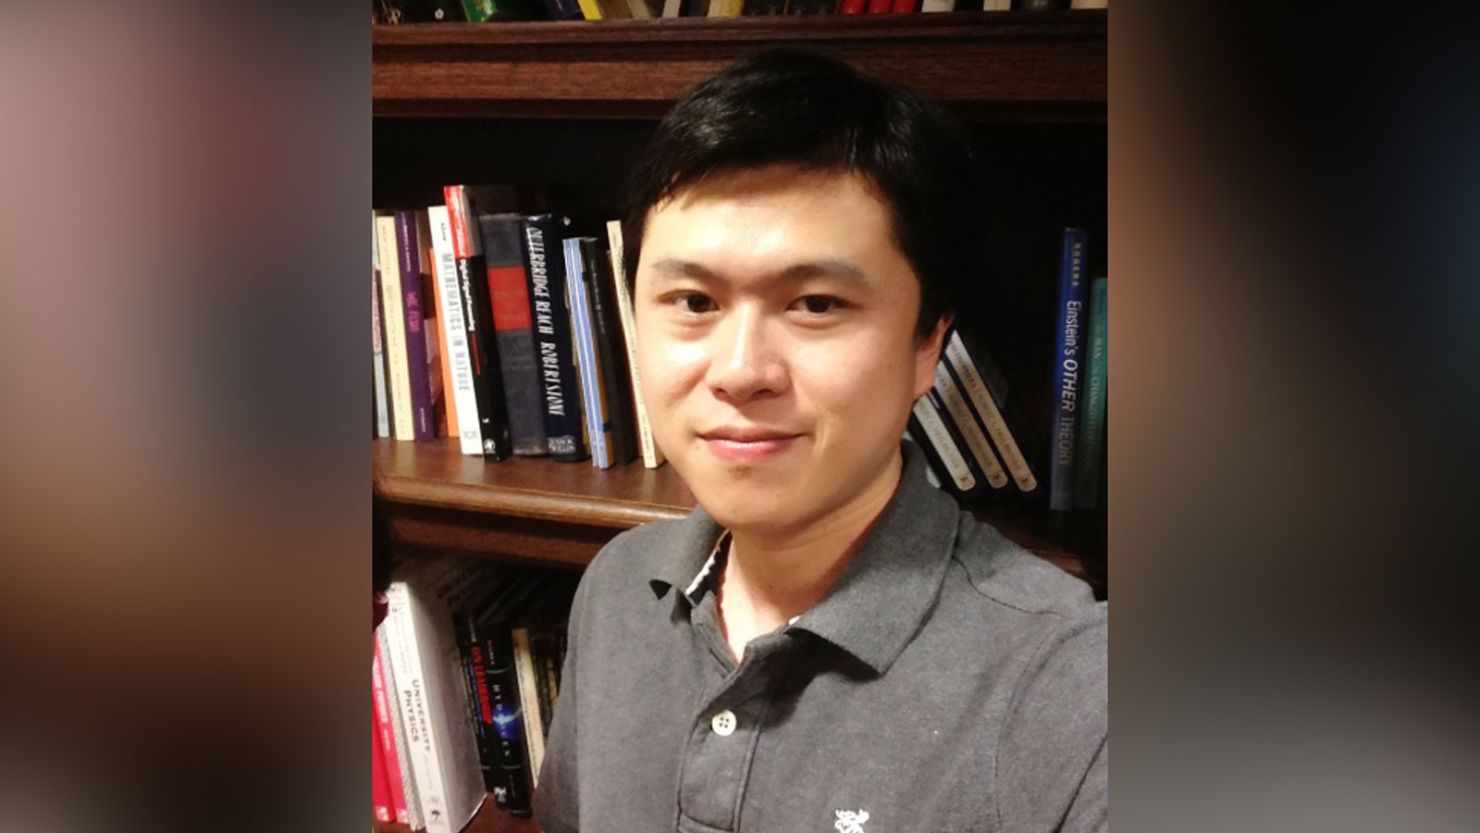 University of Pittsburgh professor Bing Liu was shot and killed in apparent murder-suicide, police said. 
